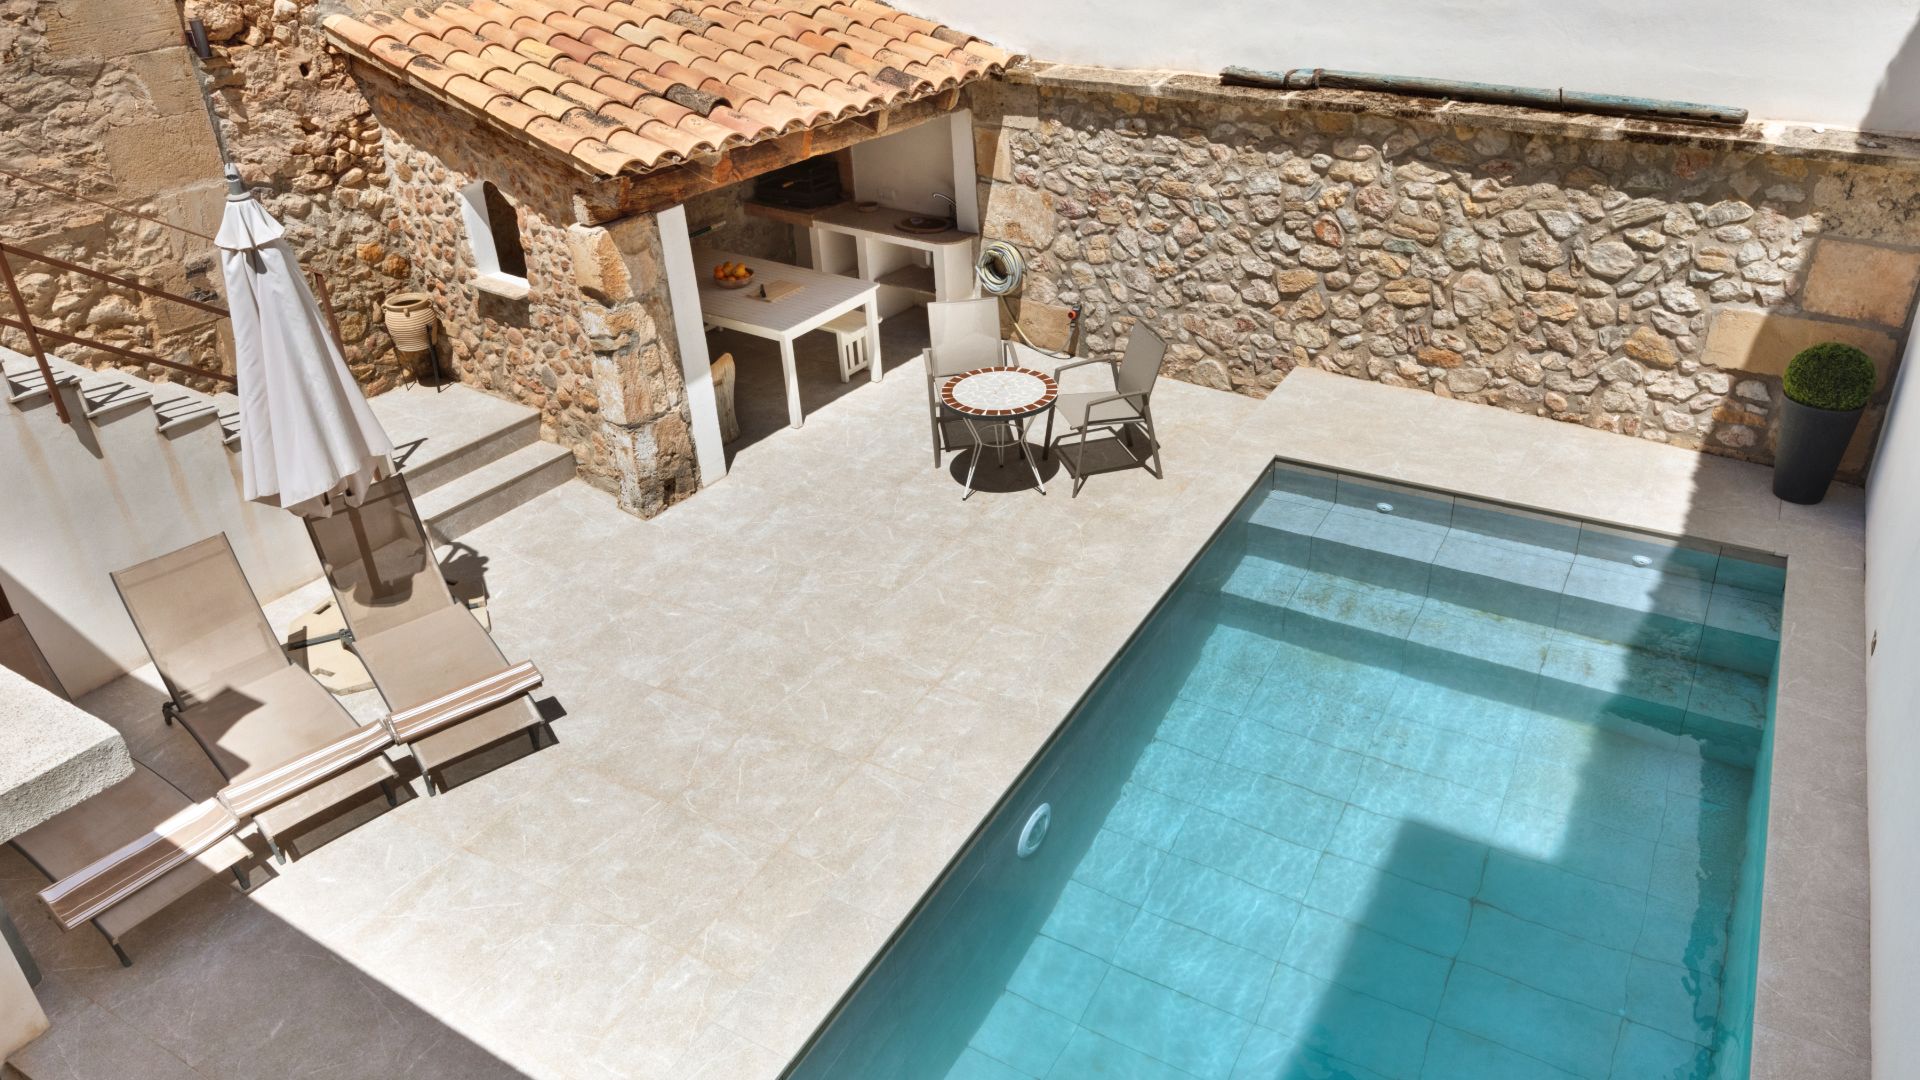 Townhouse_pollensa_Mallorca_3bed_swimming_pool_Ca_Na_Rieres